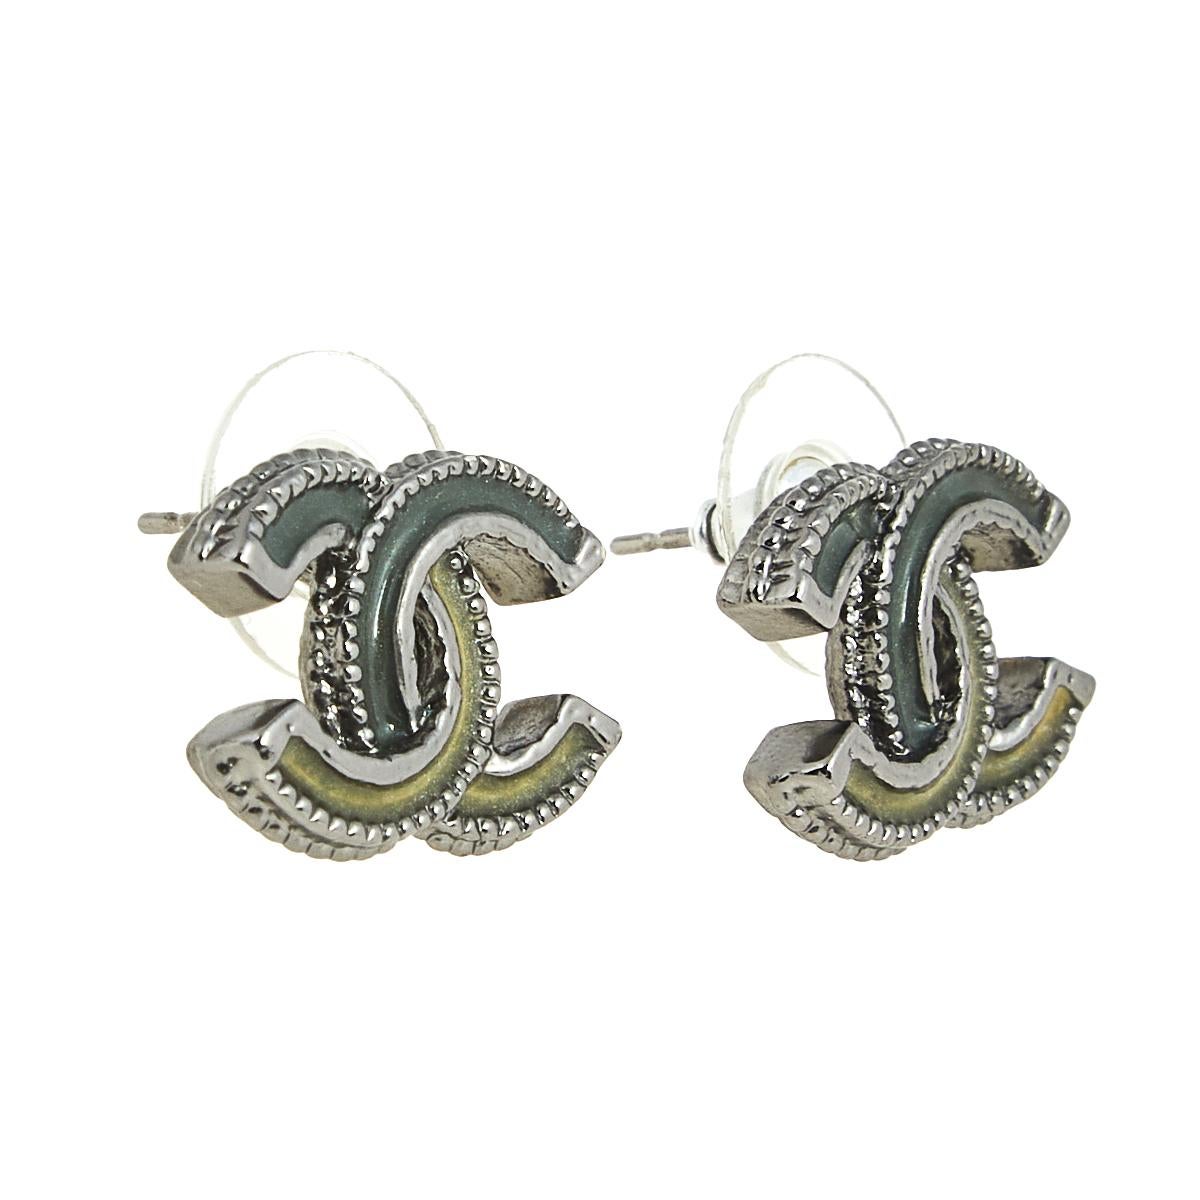 These stud earrings from Chanel are sure to win your heart. The earrings are crafted from silver-tone metal in the shape of the iconic CC logo and detailed with resin. They come equipped with push-back closure.

Includes: Original Box